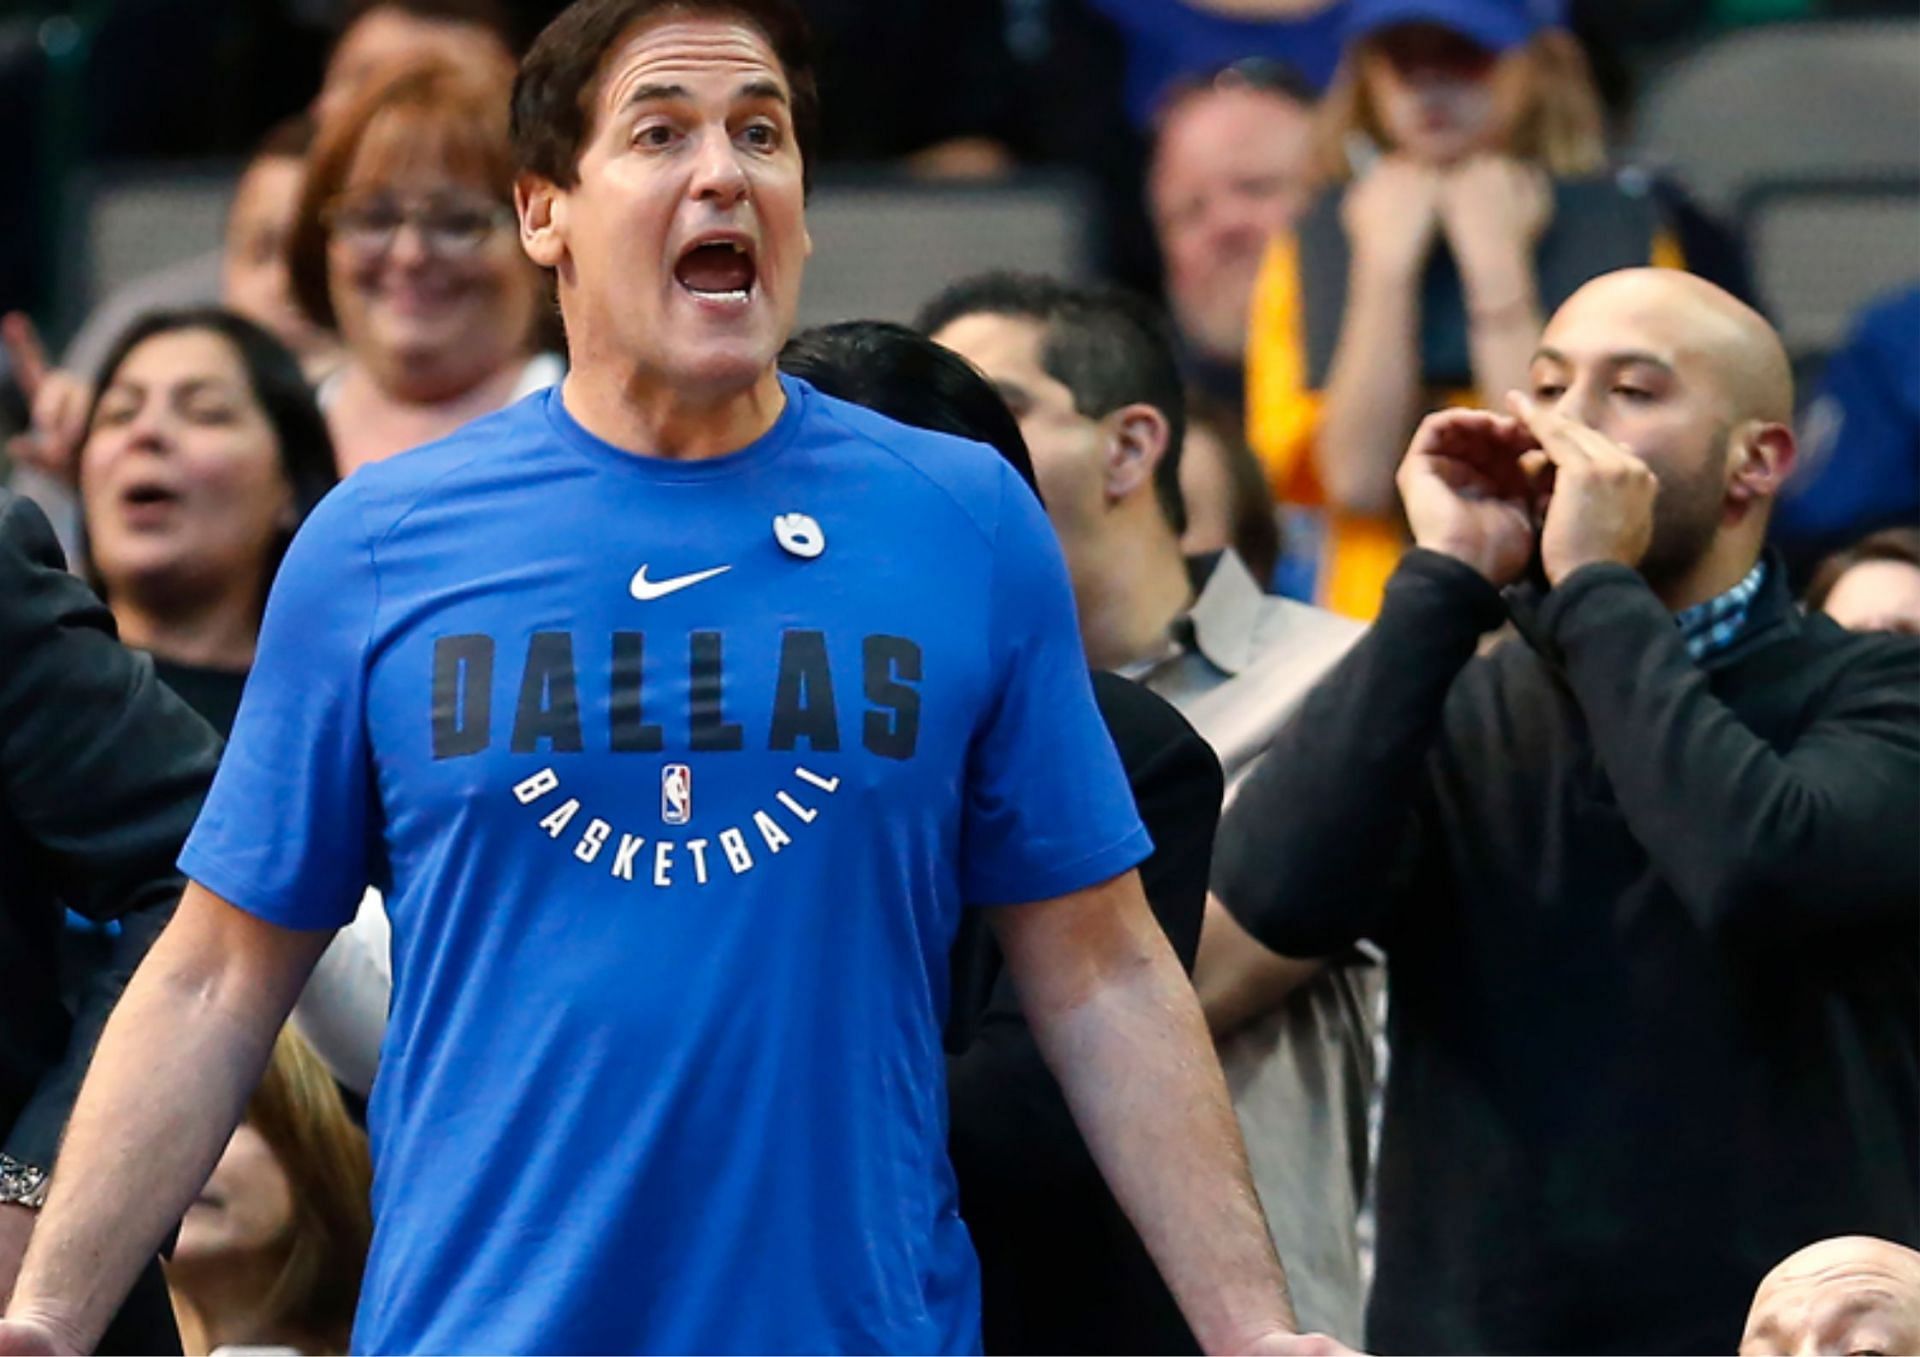 The Dallas Mavericks are planning to file a protest after an alleged officiating mistake cost them the game against the Golden State Warriors.